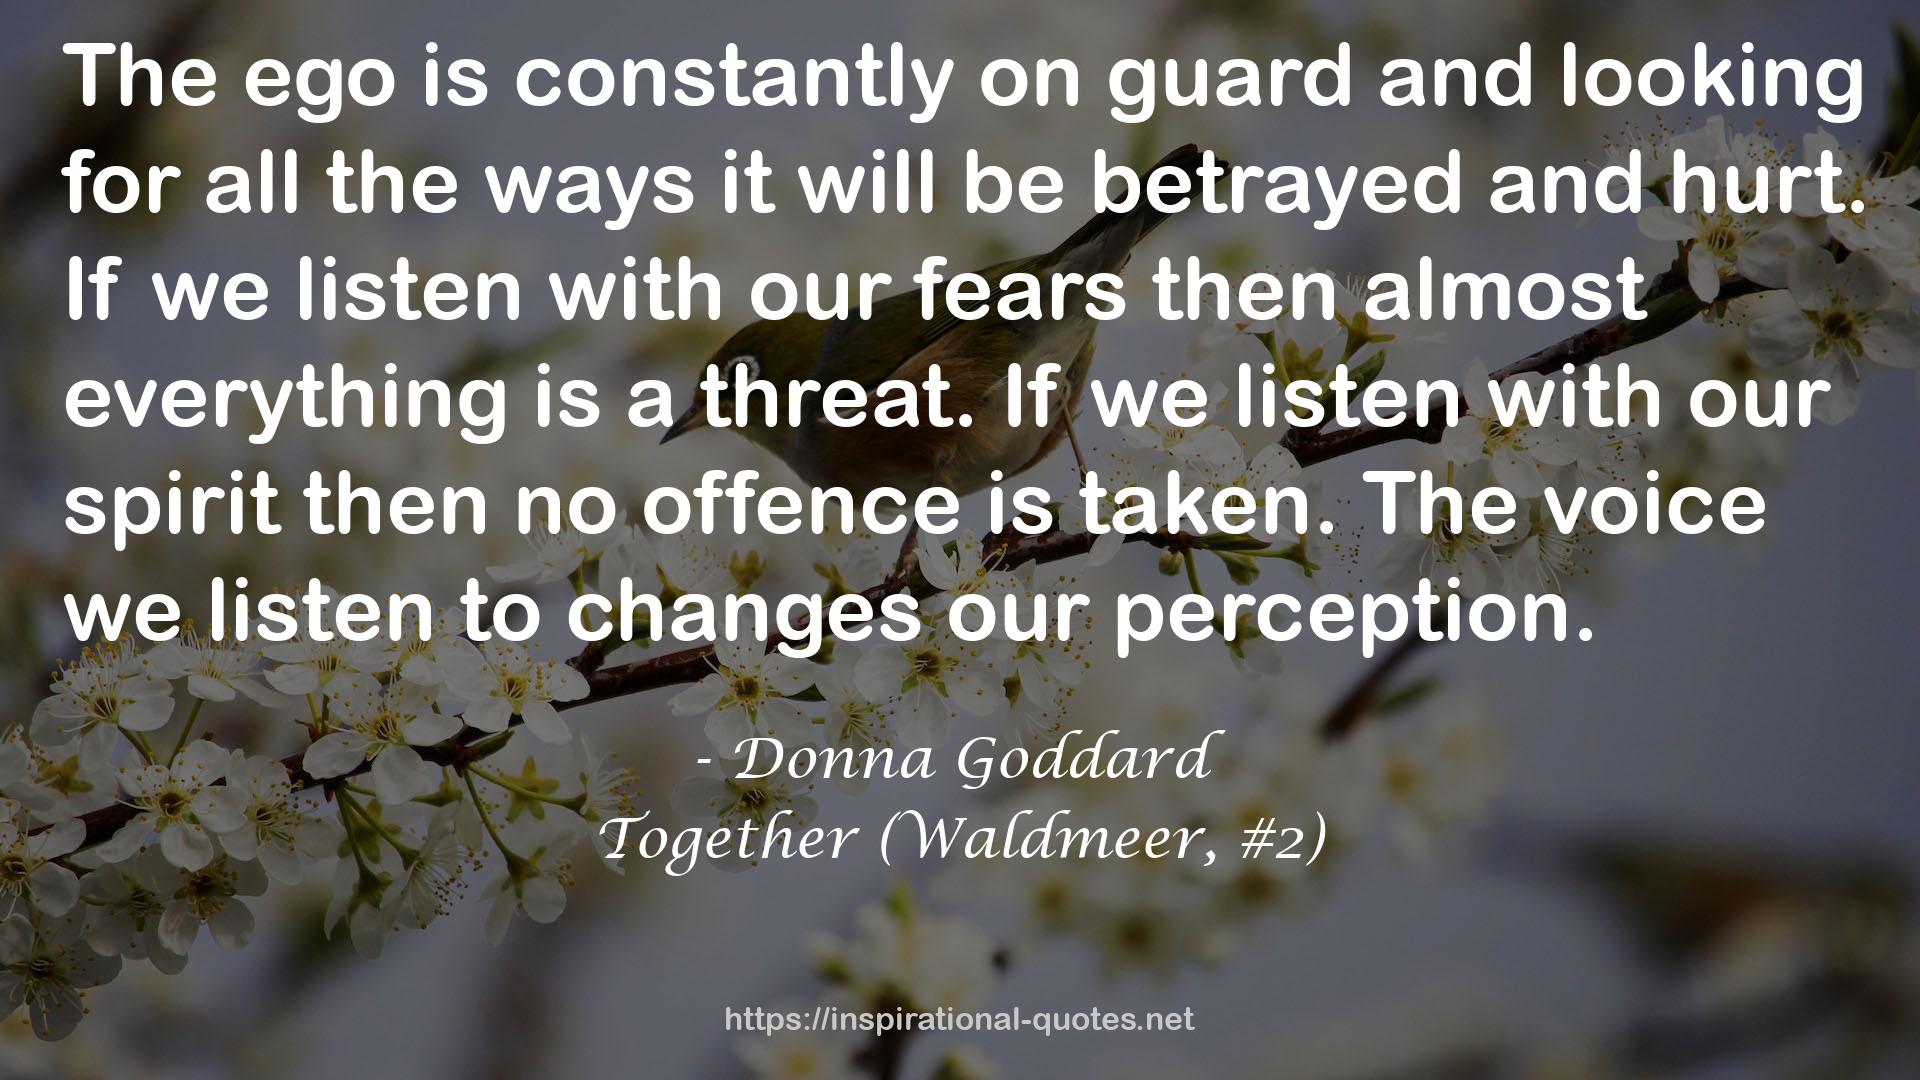 Together (Waldmeer, #2) QUOTES